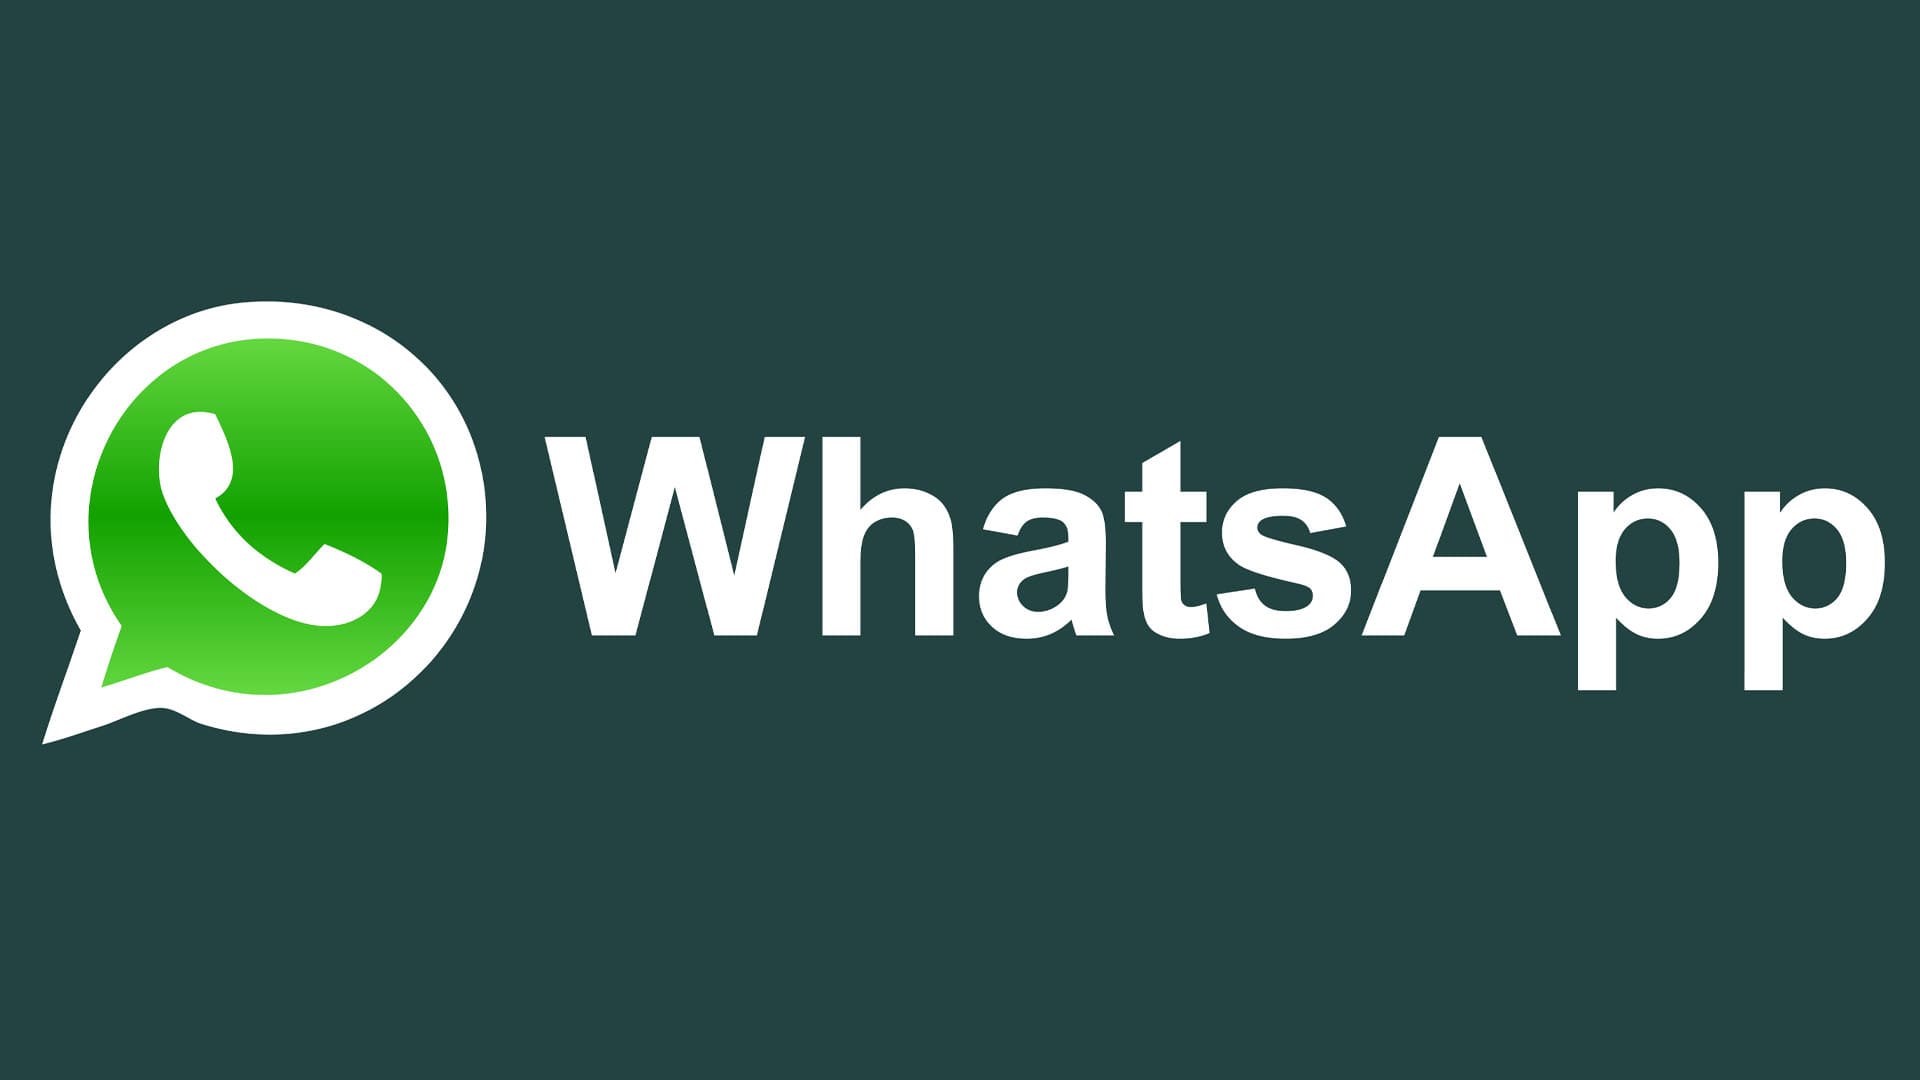 WhatsApp's Latest Innovation: Group Call Scheduling Functionality